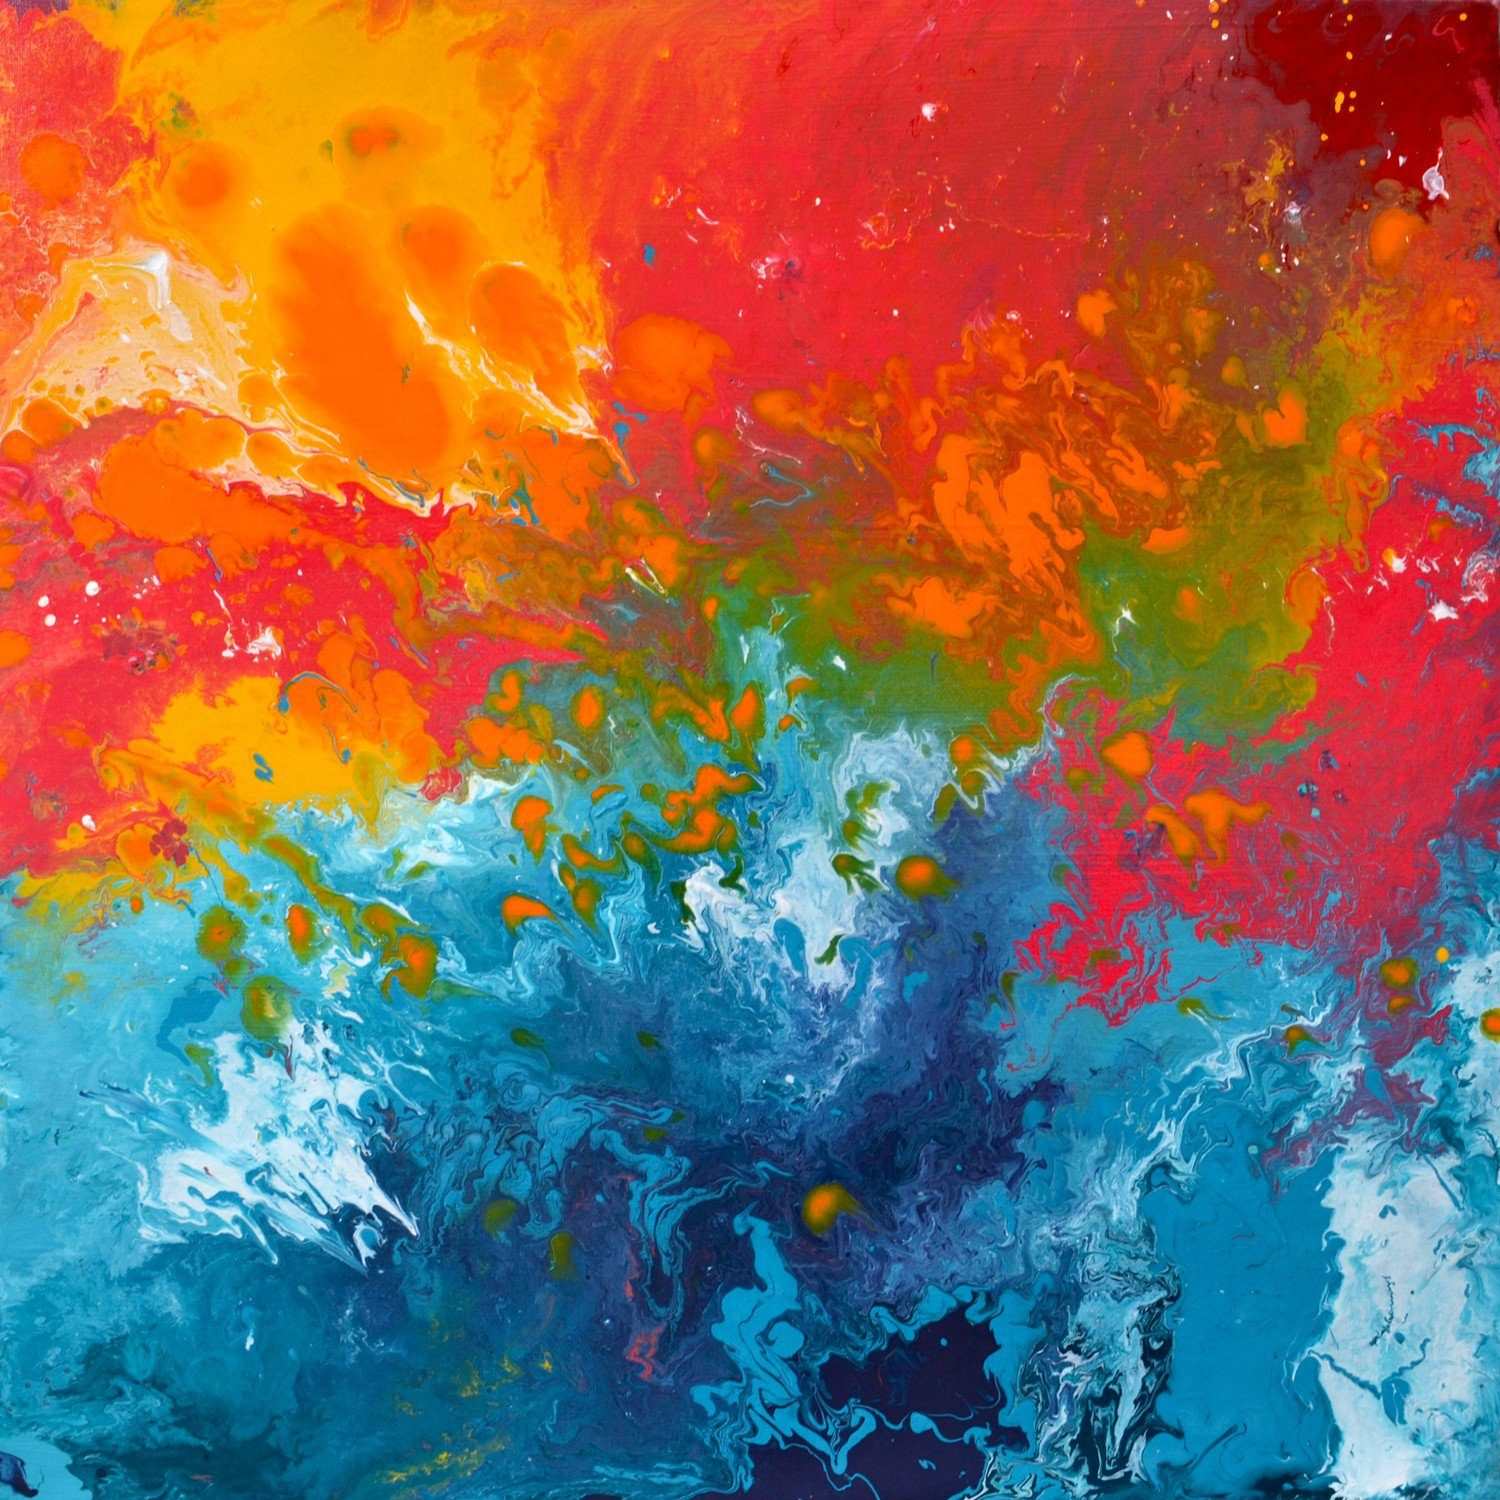 Incalescence Bold Orange and Blue Square Large Fluid Art Abstract Impressionist Painting on Canvas by Louise Mead